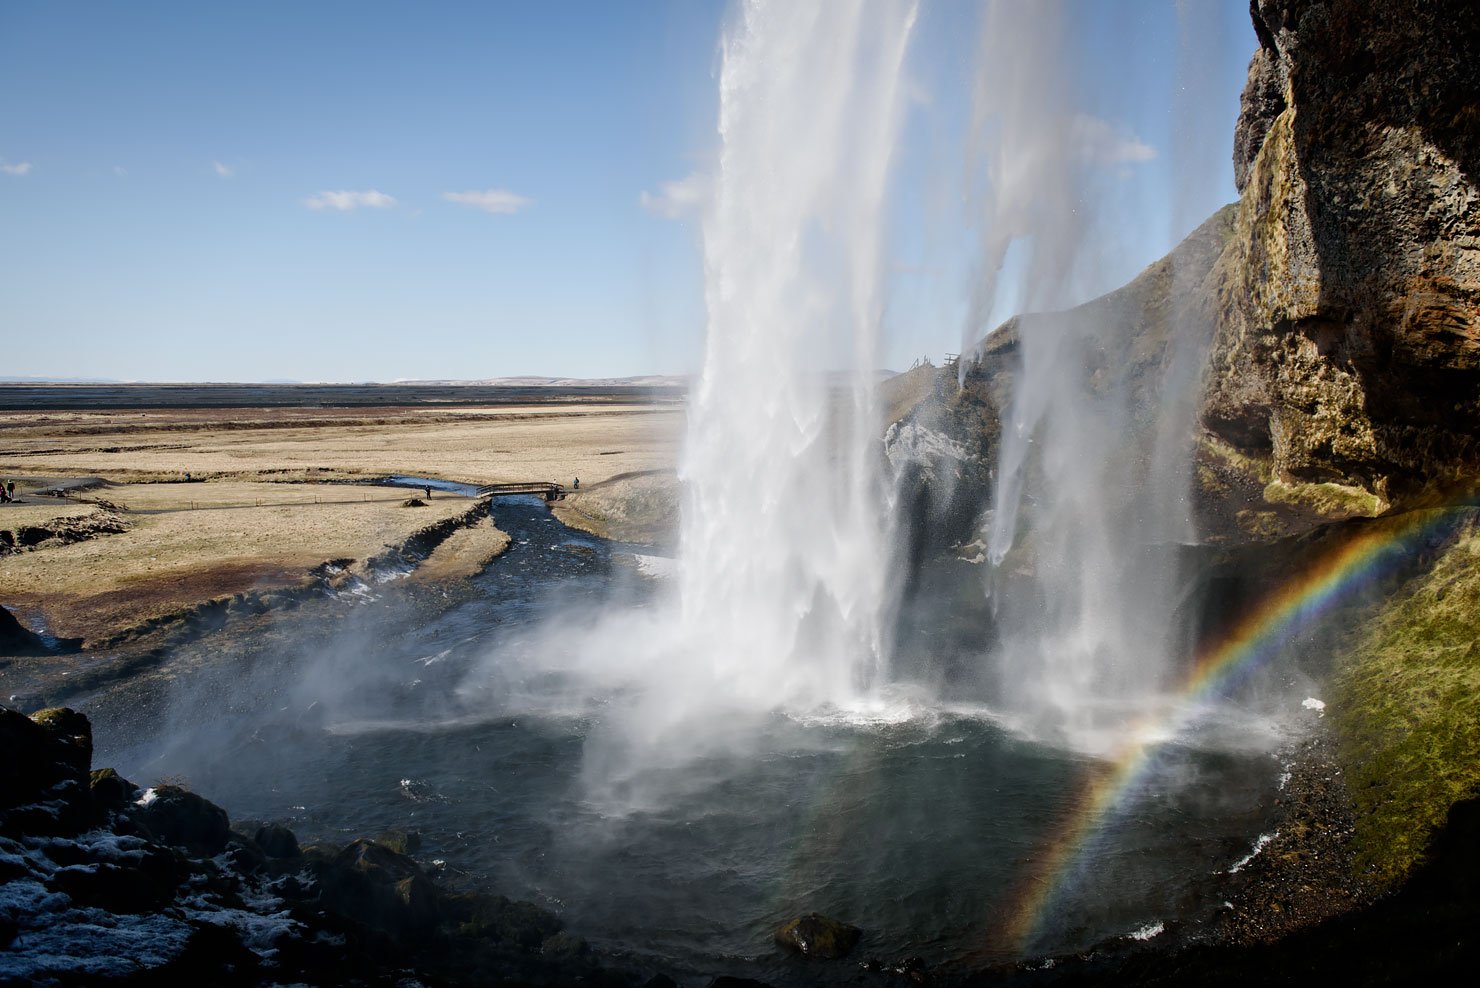 Road Trip in Iceland, the South Coast. Seljalandsfoss waterfall with rainbow.